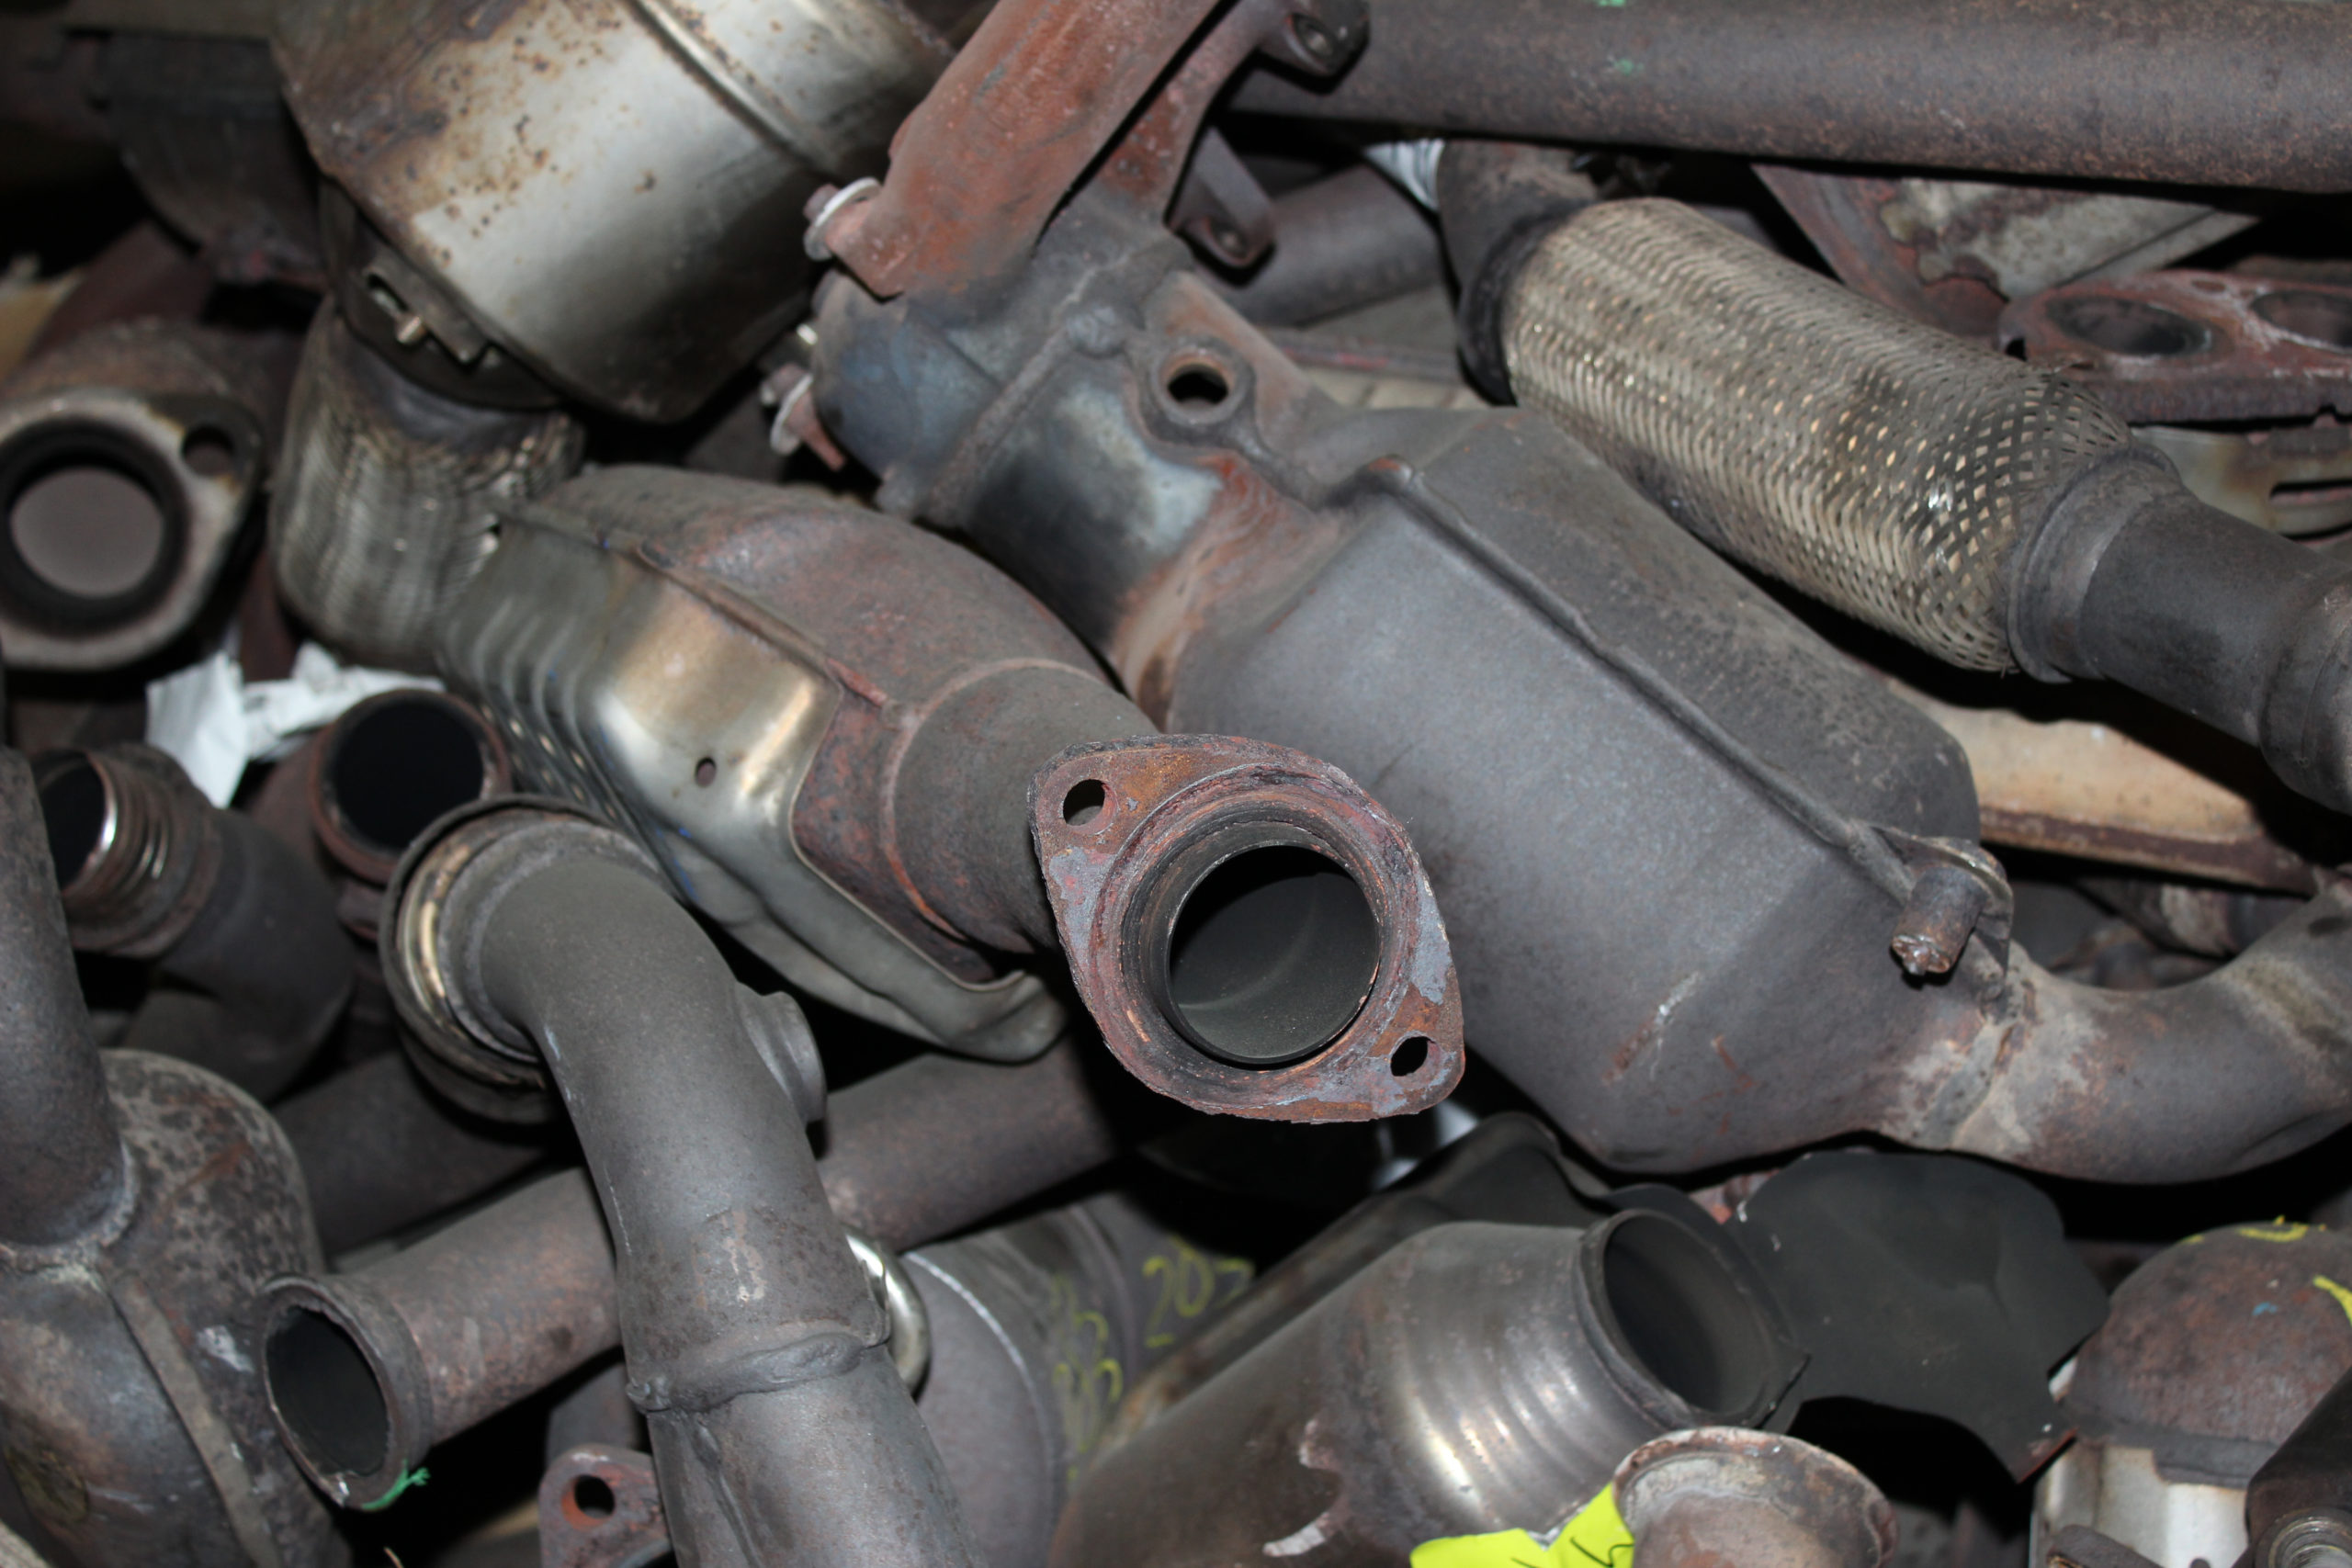 Old metal car parts, including catalytic converters.